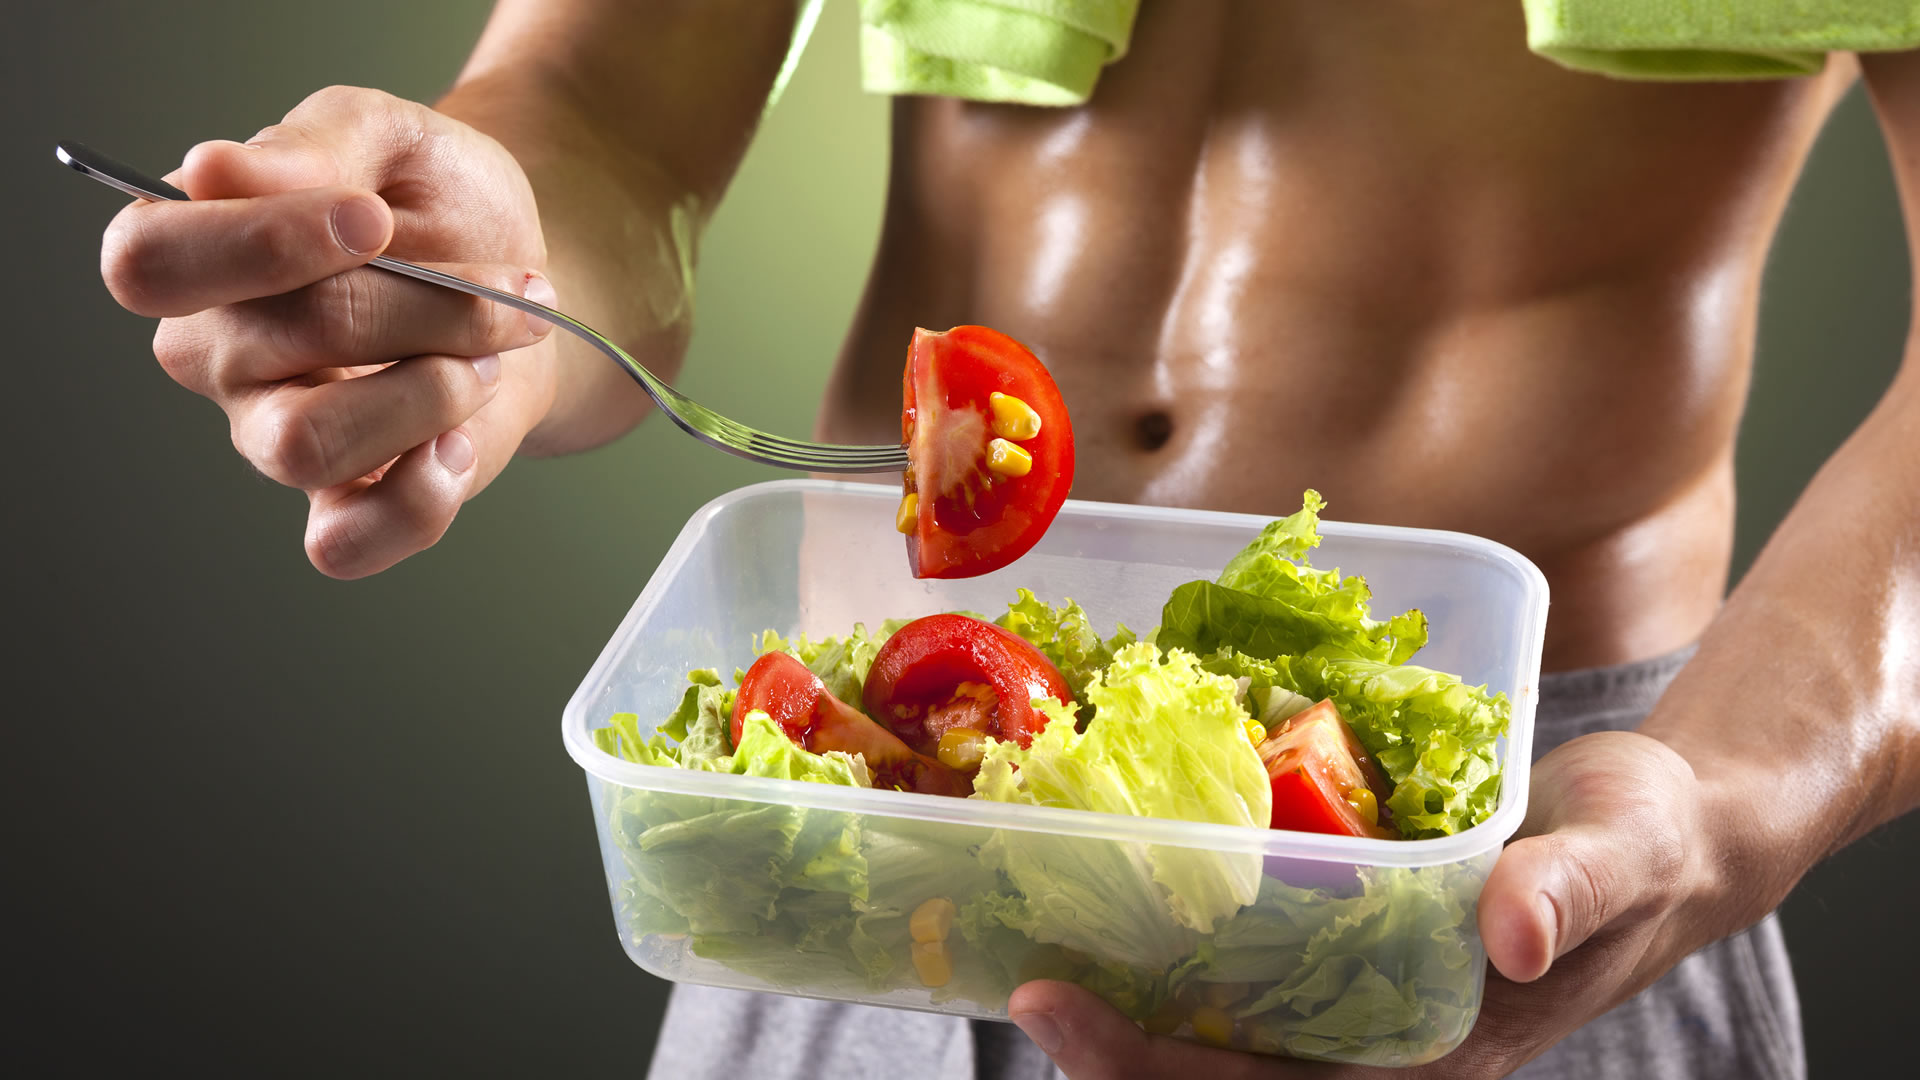 Should you eat before a workout?